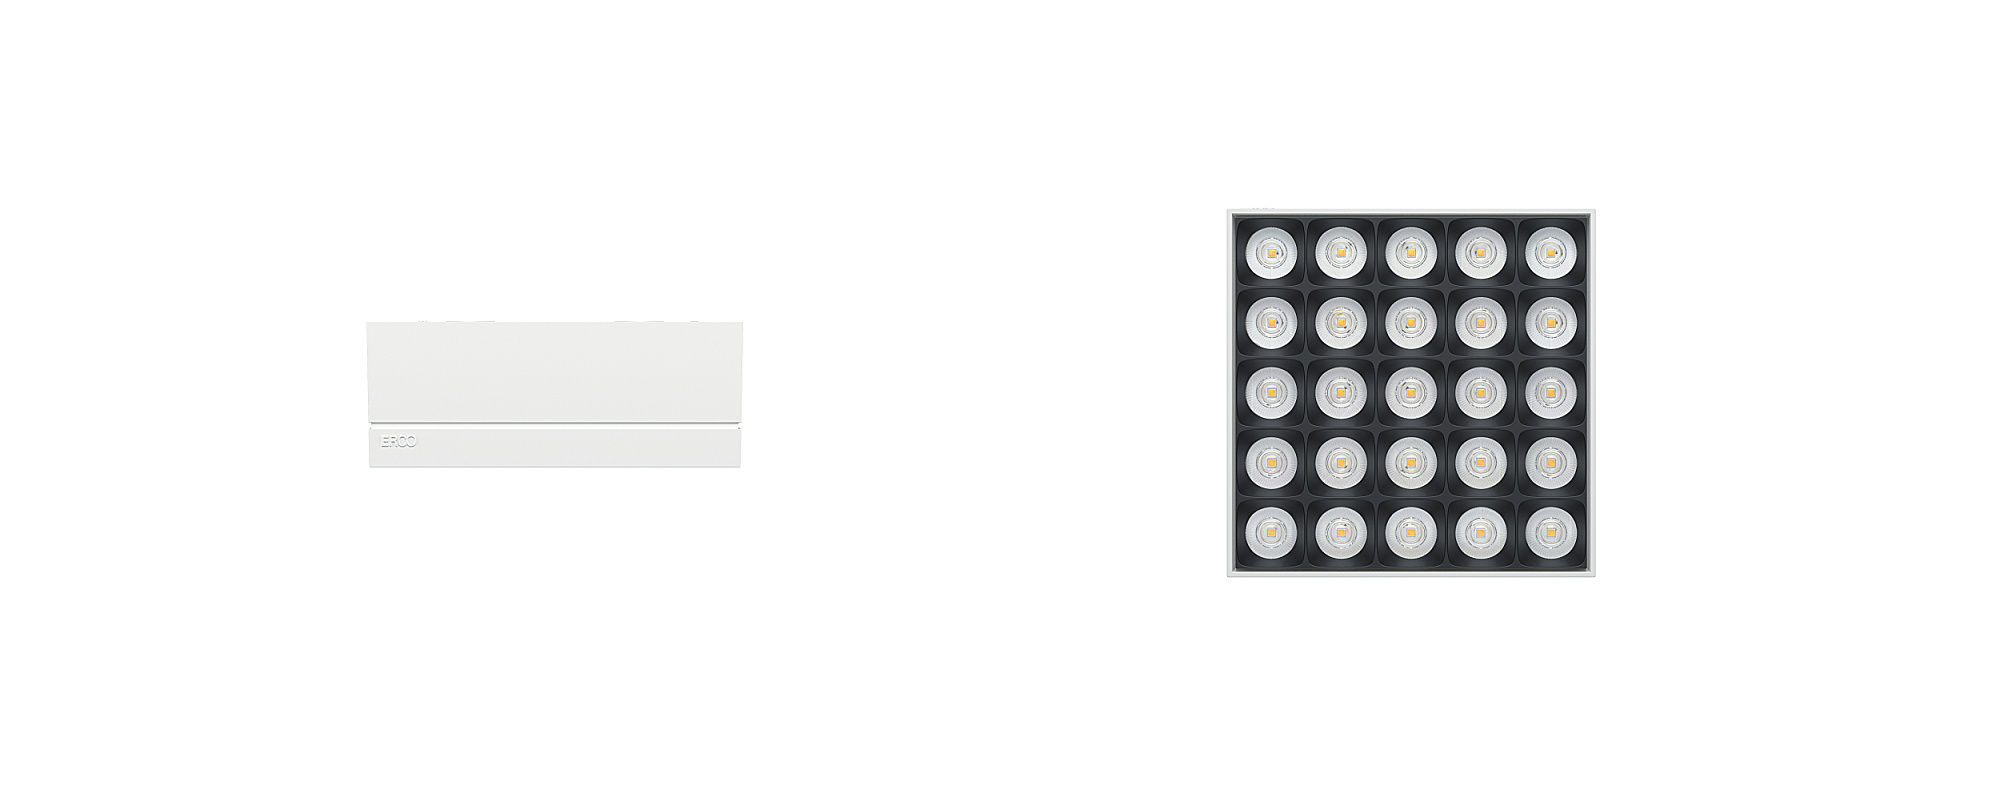 Jilly square - Surface-mounted luminaires